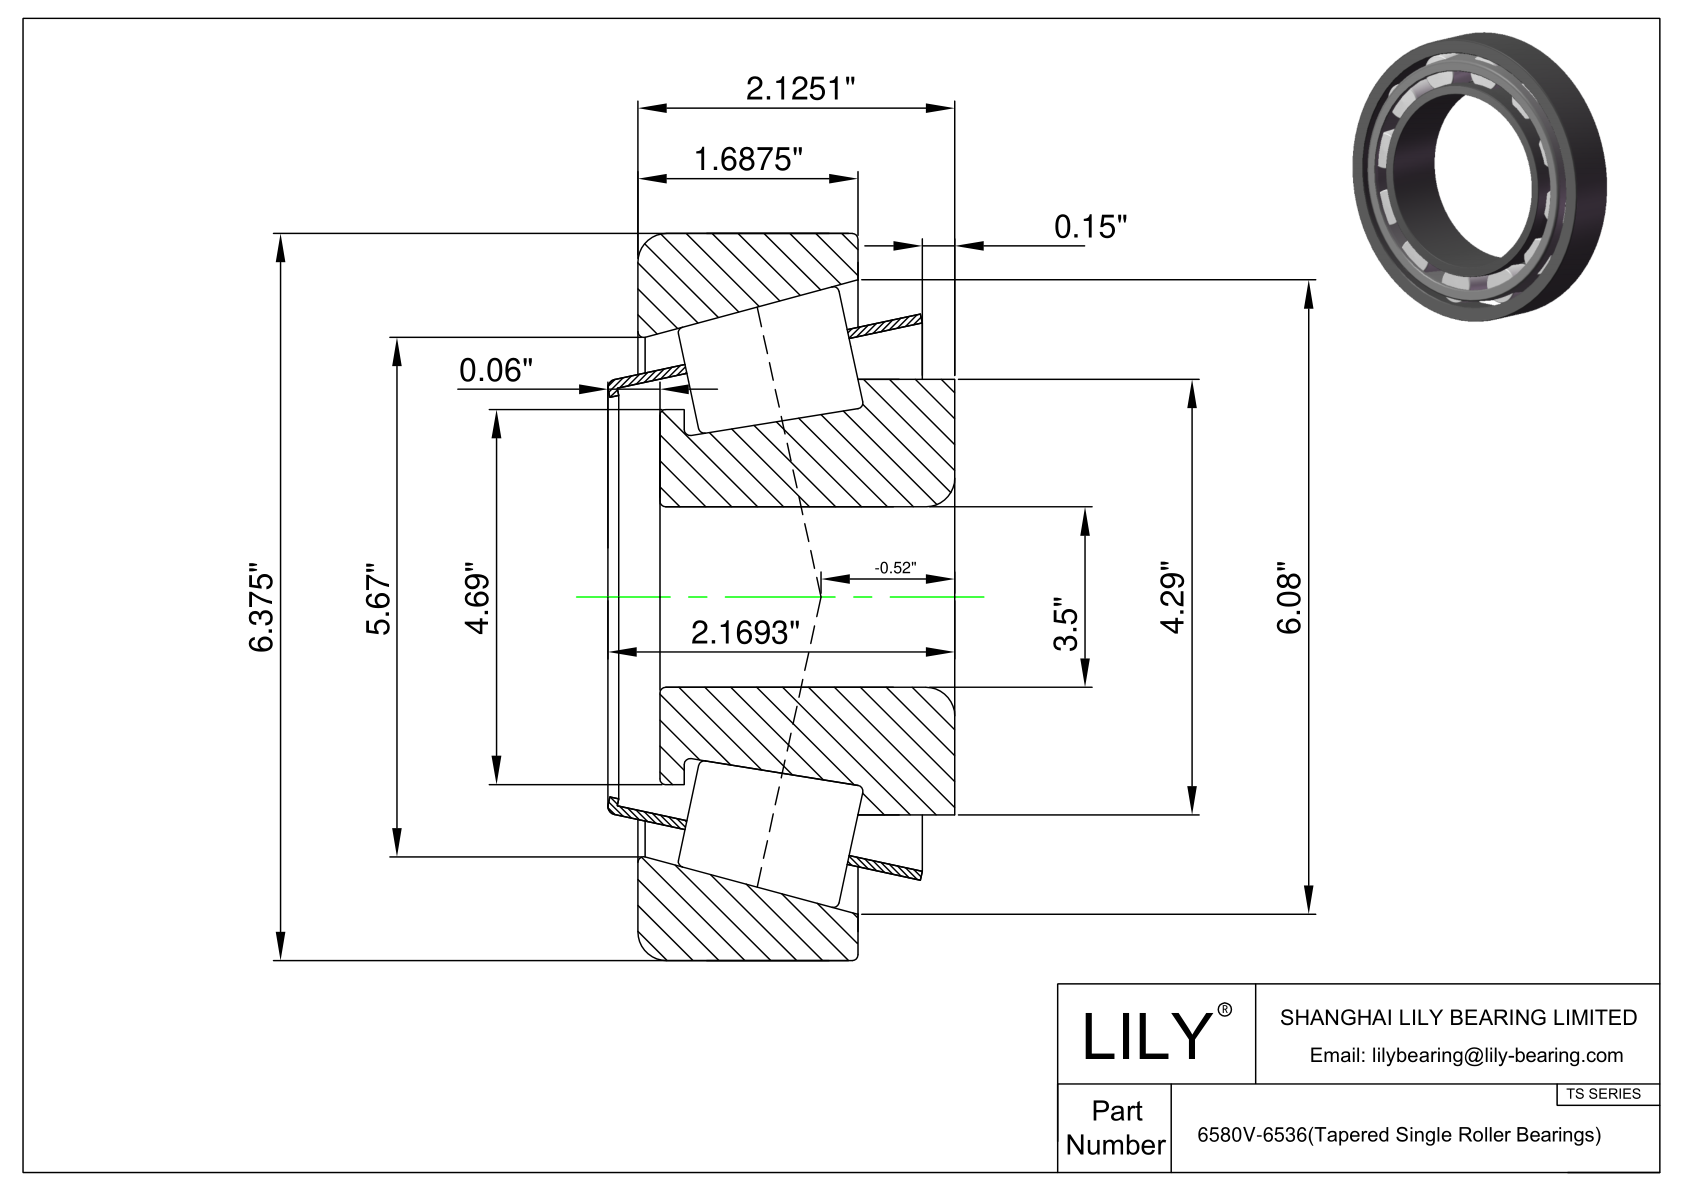 6580V-6536 TS (Tapered Single Roller Bearings) (Imperial) cad drawing